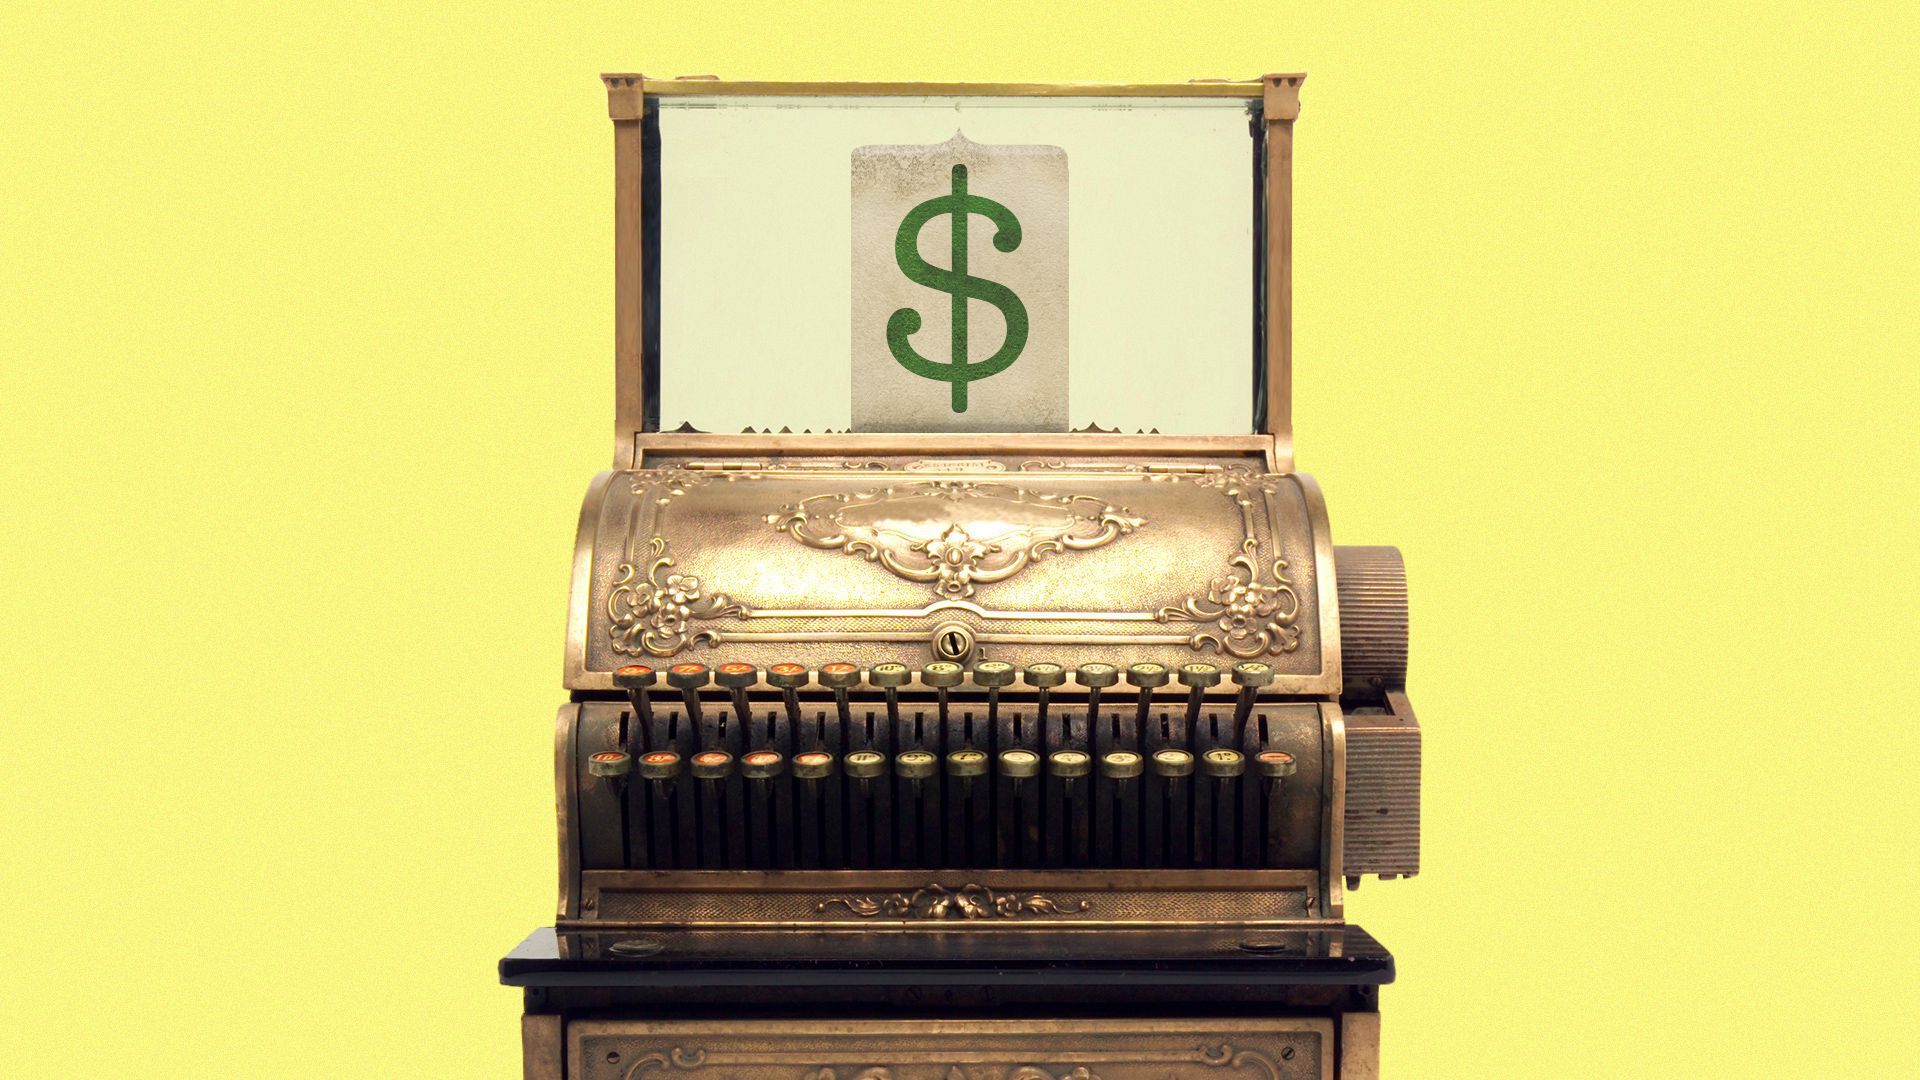 Cash register with dollar sign in window